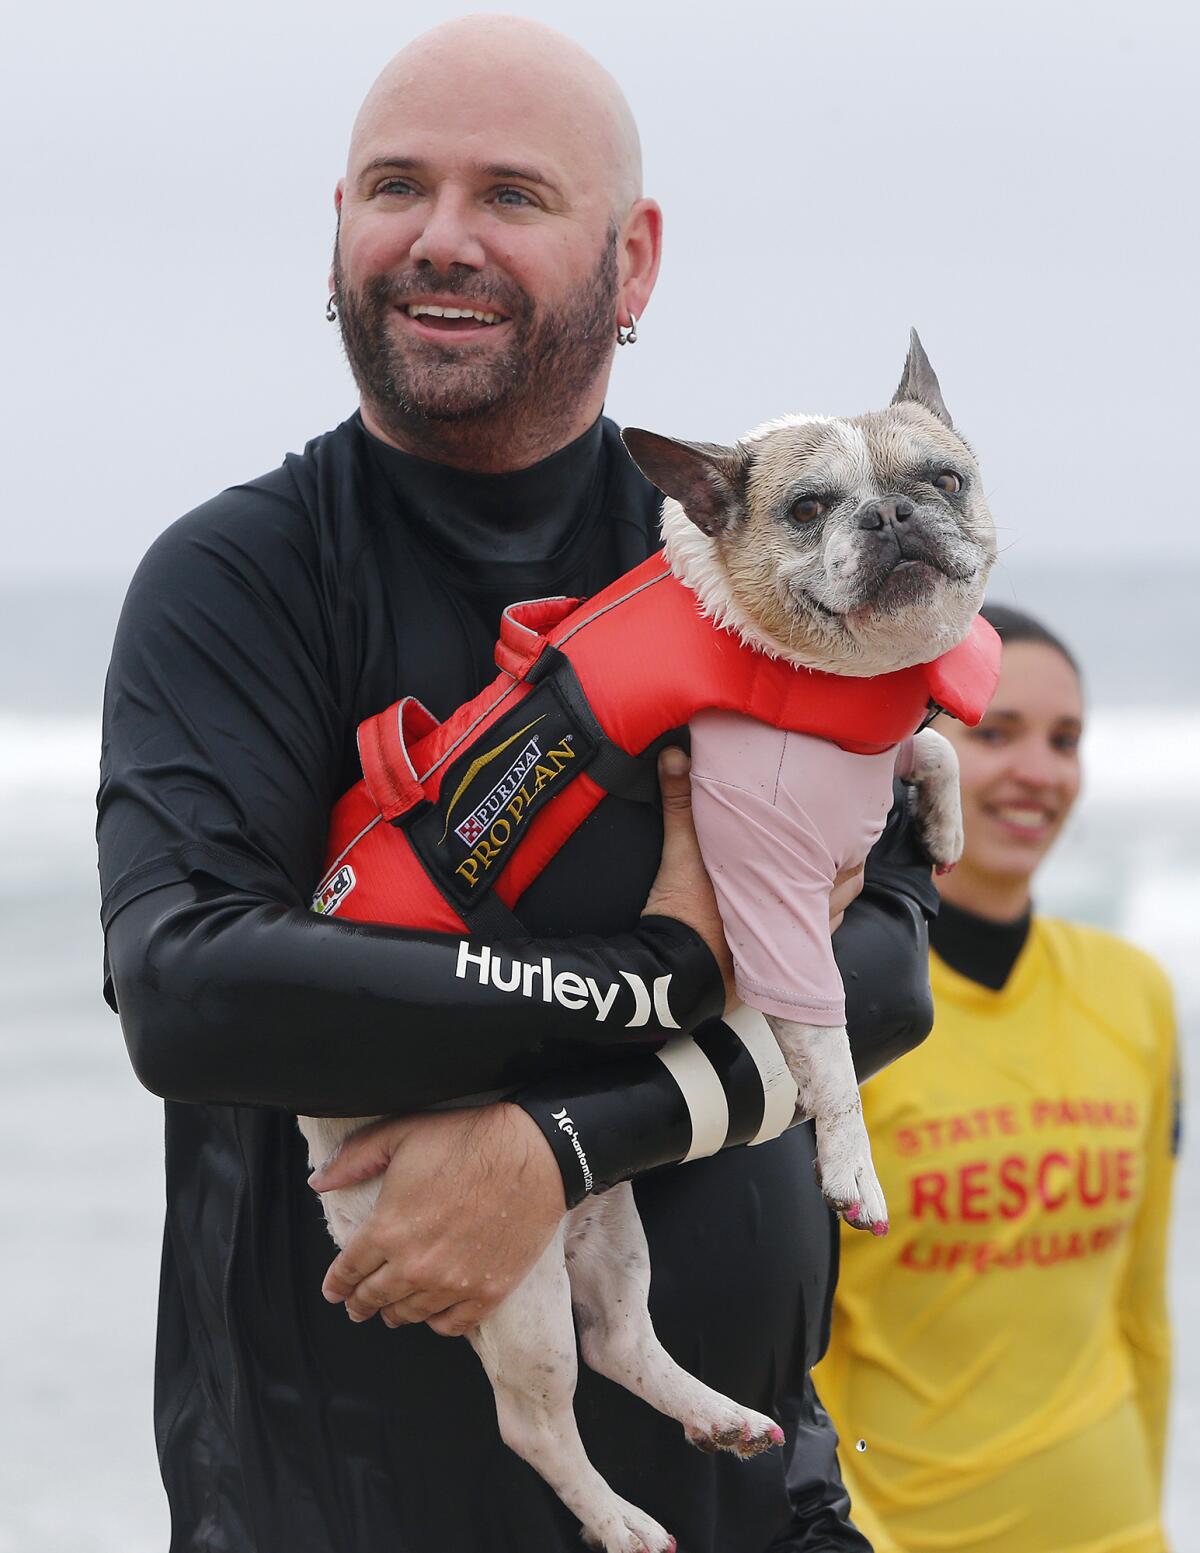 Dan Nykolayko of Newport Beach carries Cherie, a French bull dog, after they competed on Friday morning.